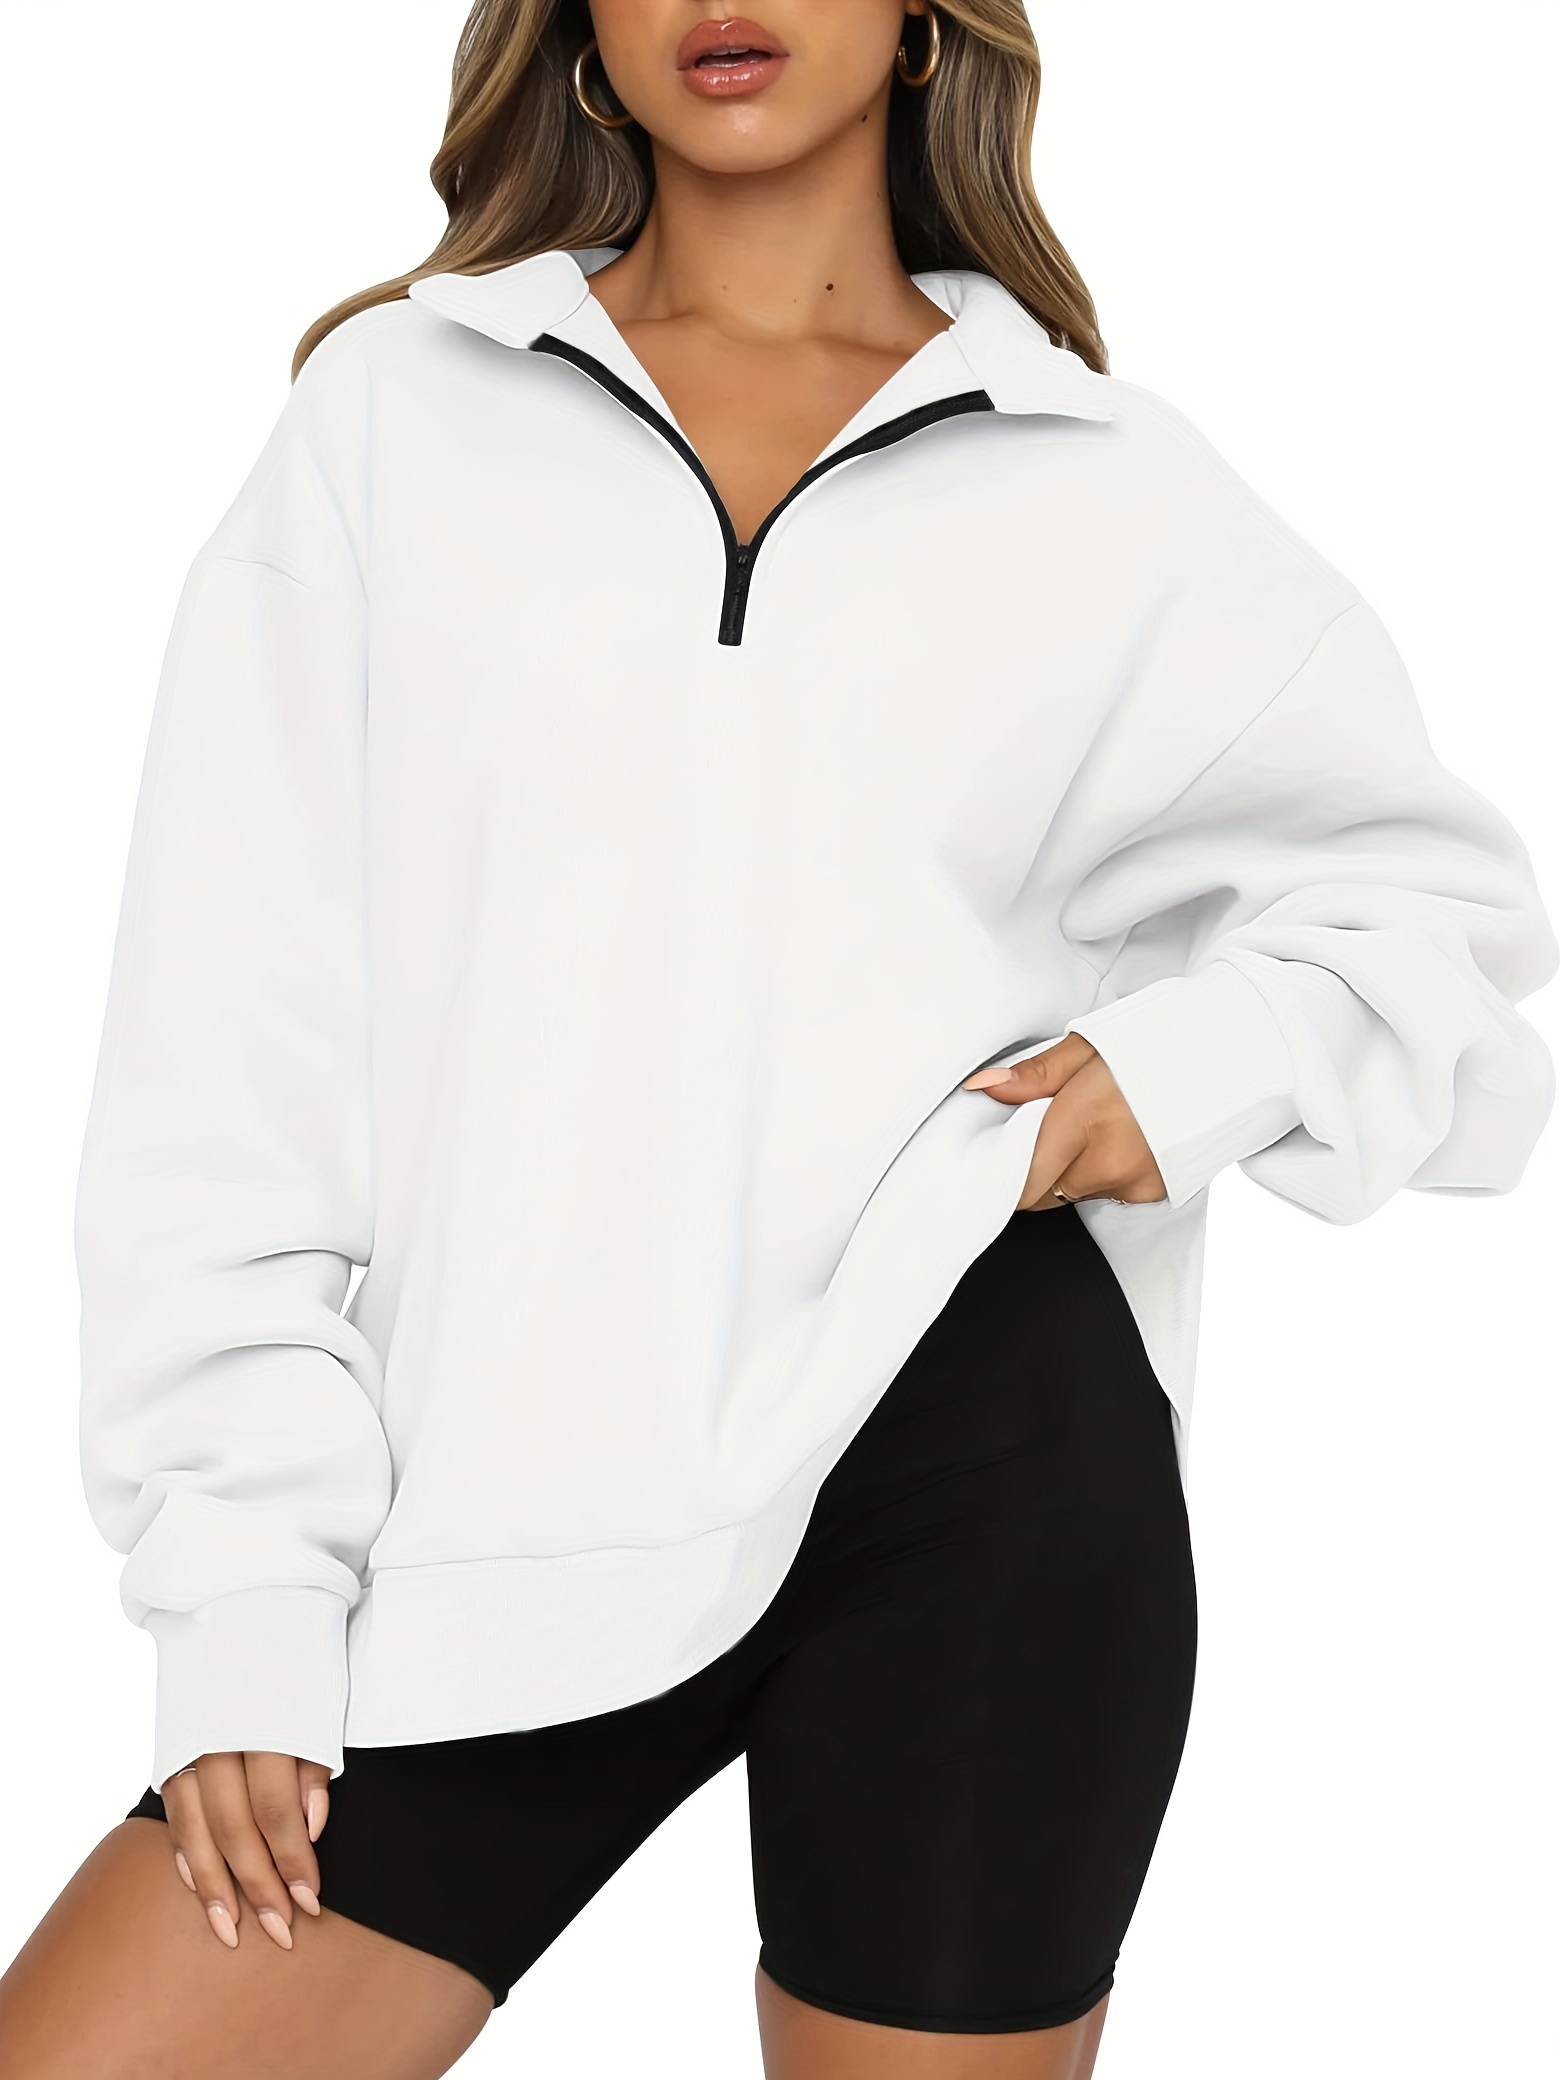 Sweatshirt For Women, Casual Fashion Long Sleeve Solid Color Zip Pullover  Hoodise Hoodies Sweatshirt Top Fall Clothes Oversized Shirts Women Trendy